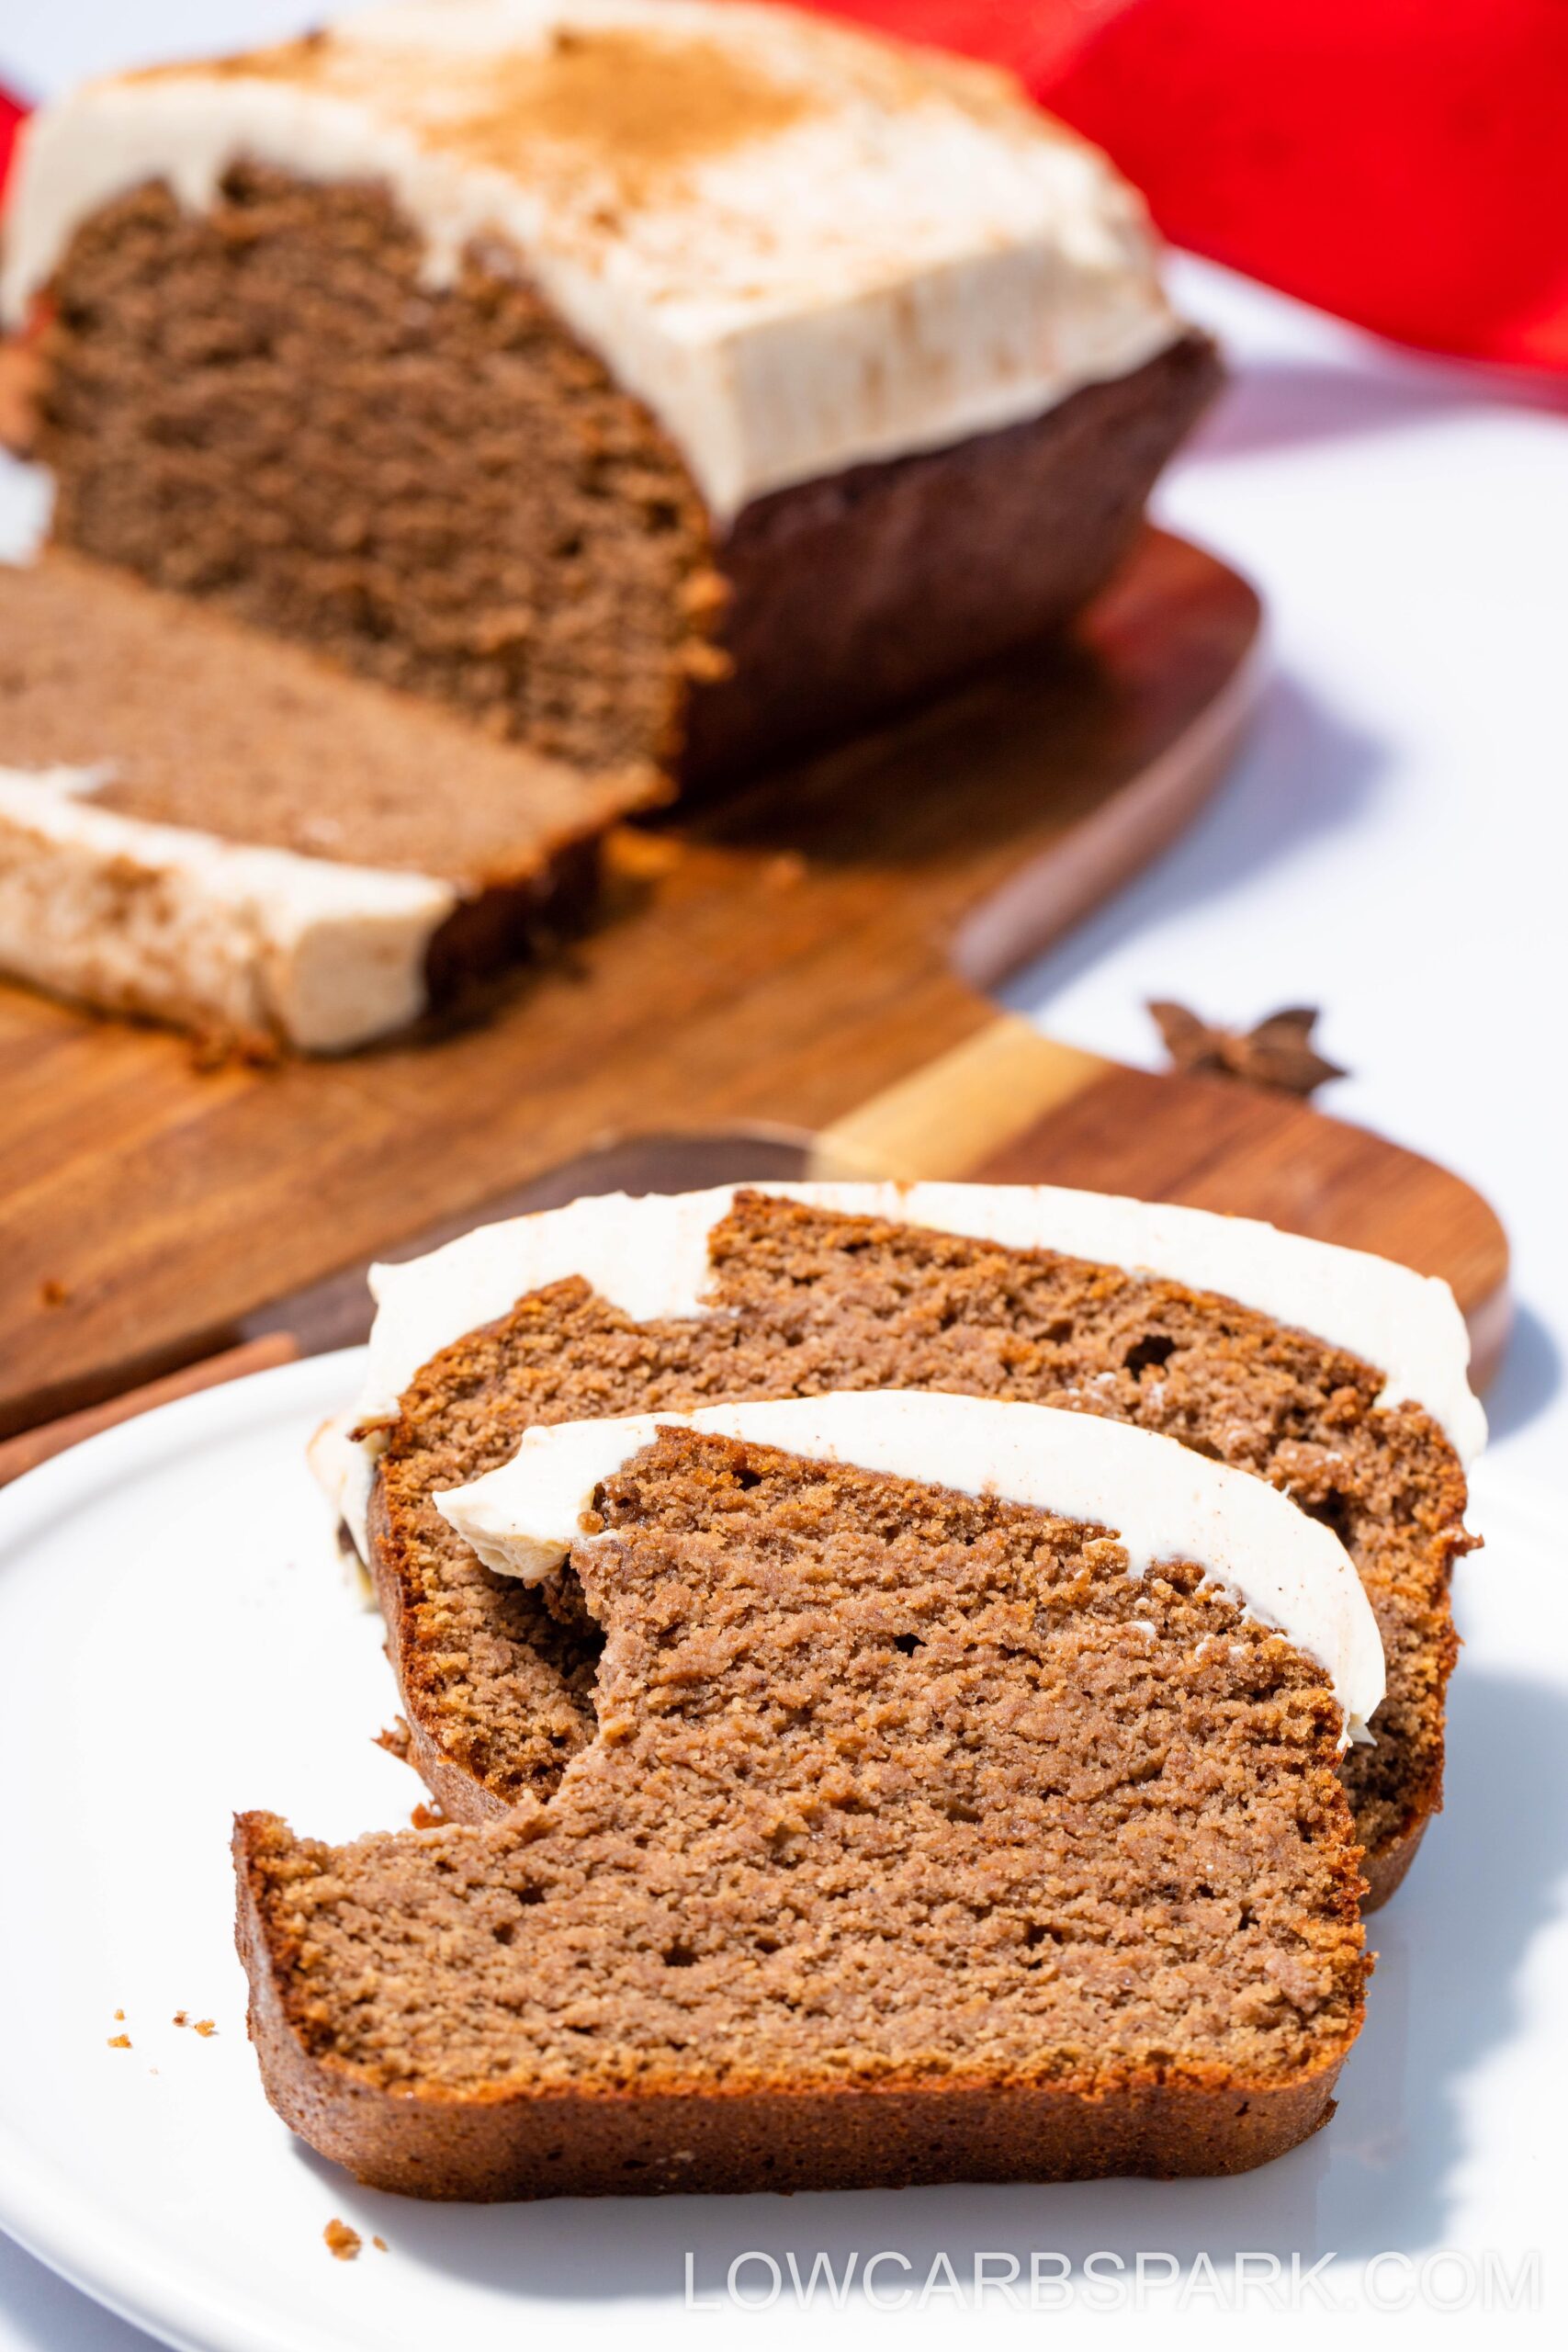 Keto Gingerbread Loaf with Cinnamon Cream Cheese Frosting